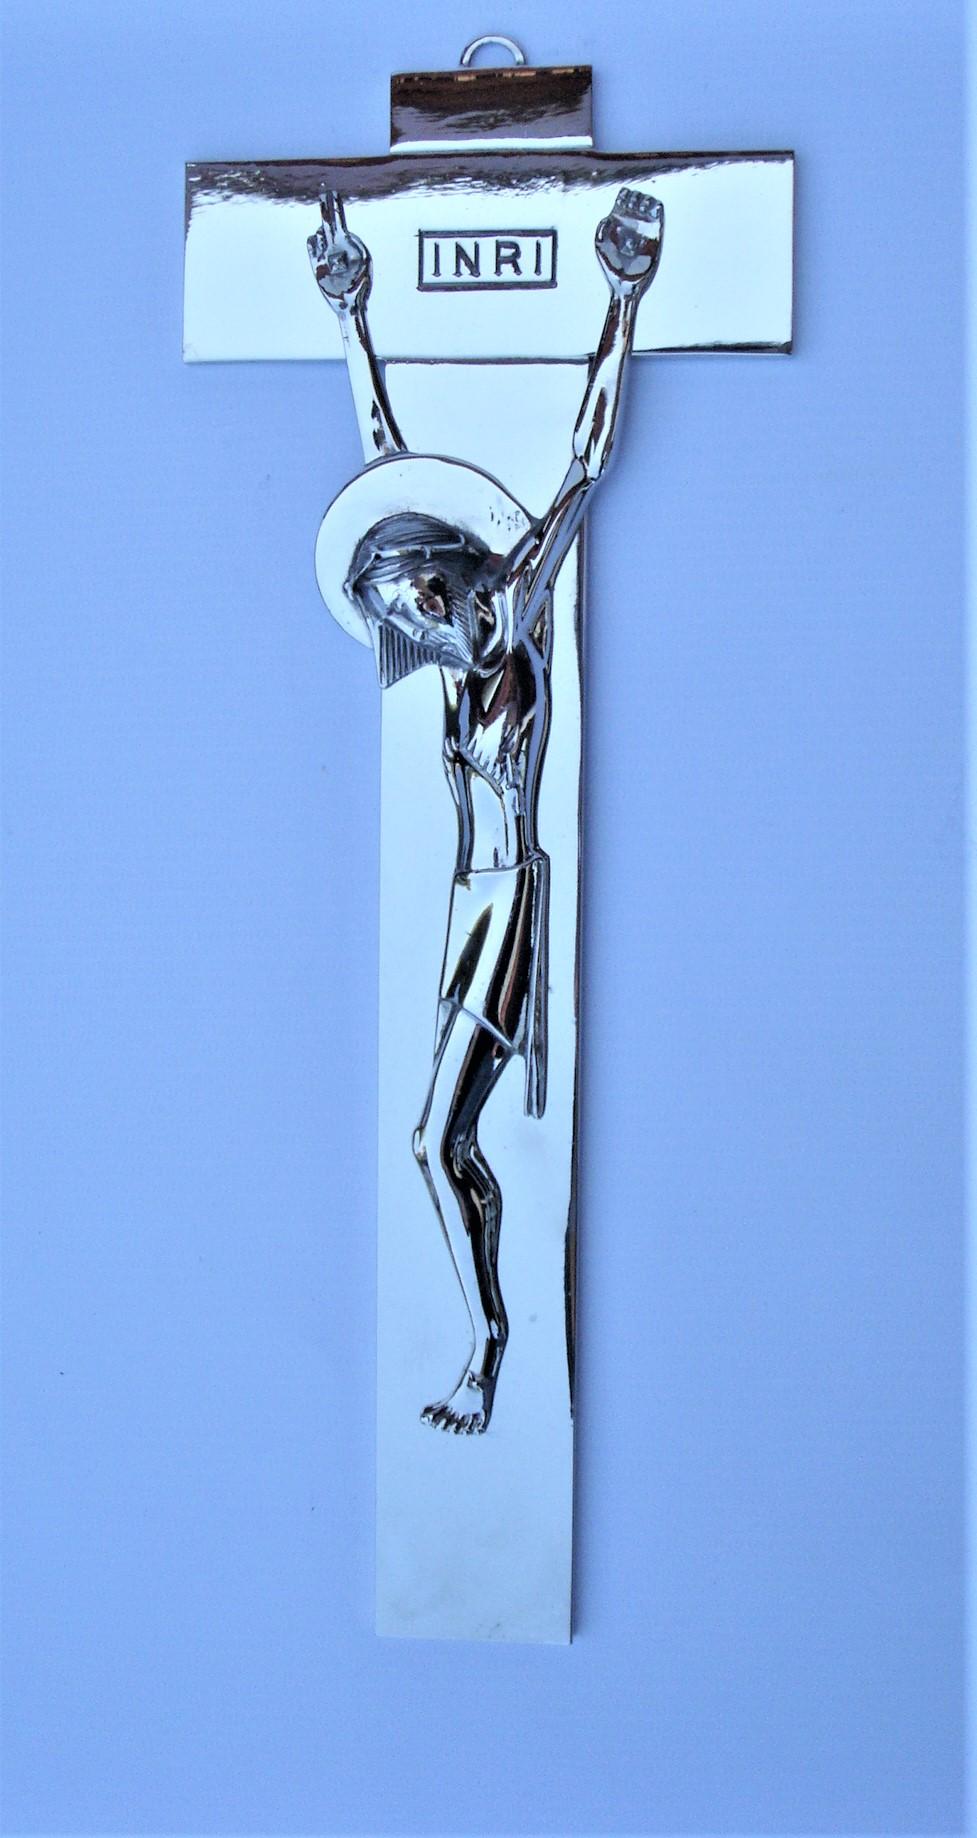 Art Deco / mid-century crucifix depicting a nikel plated bronze Jesus on Cross.
Wall Crucifix silver plated Bronze Christ Corpus.
So what does INRI mean on the cross?
INRI is an abbreviation of the Latin inscription Iesus Nazarenus Rex Iudaeorum,